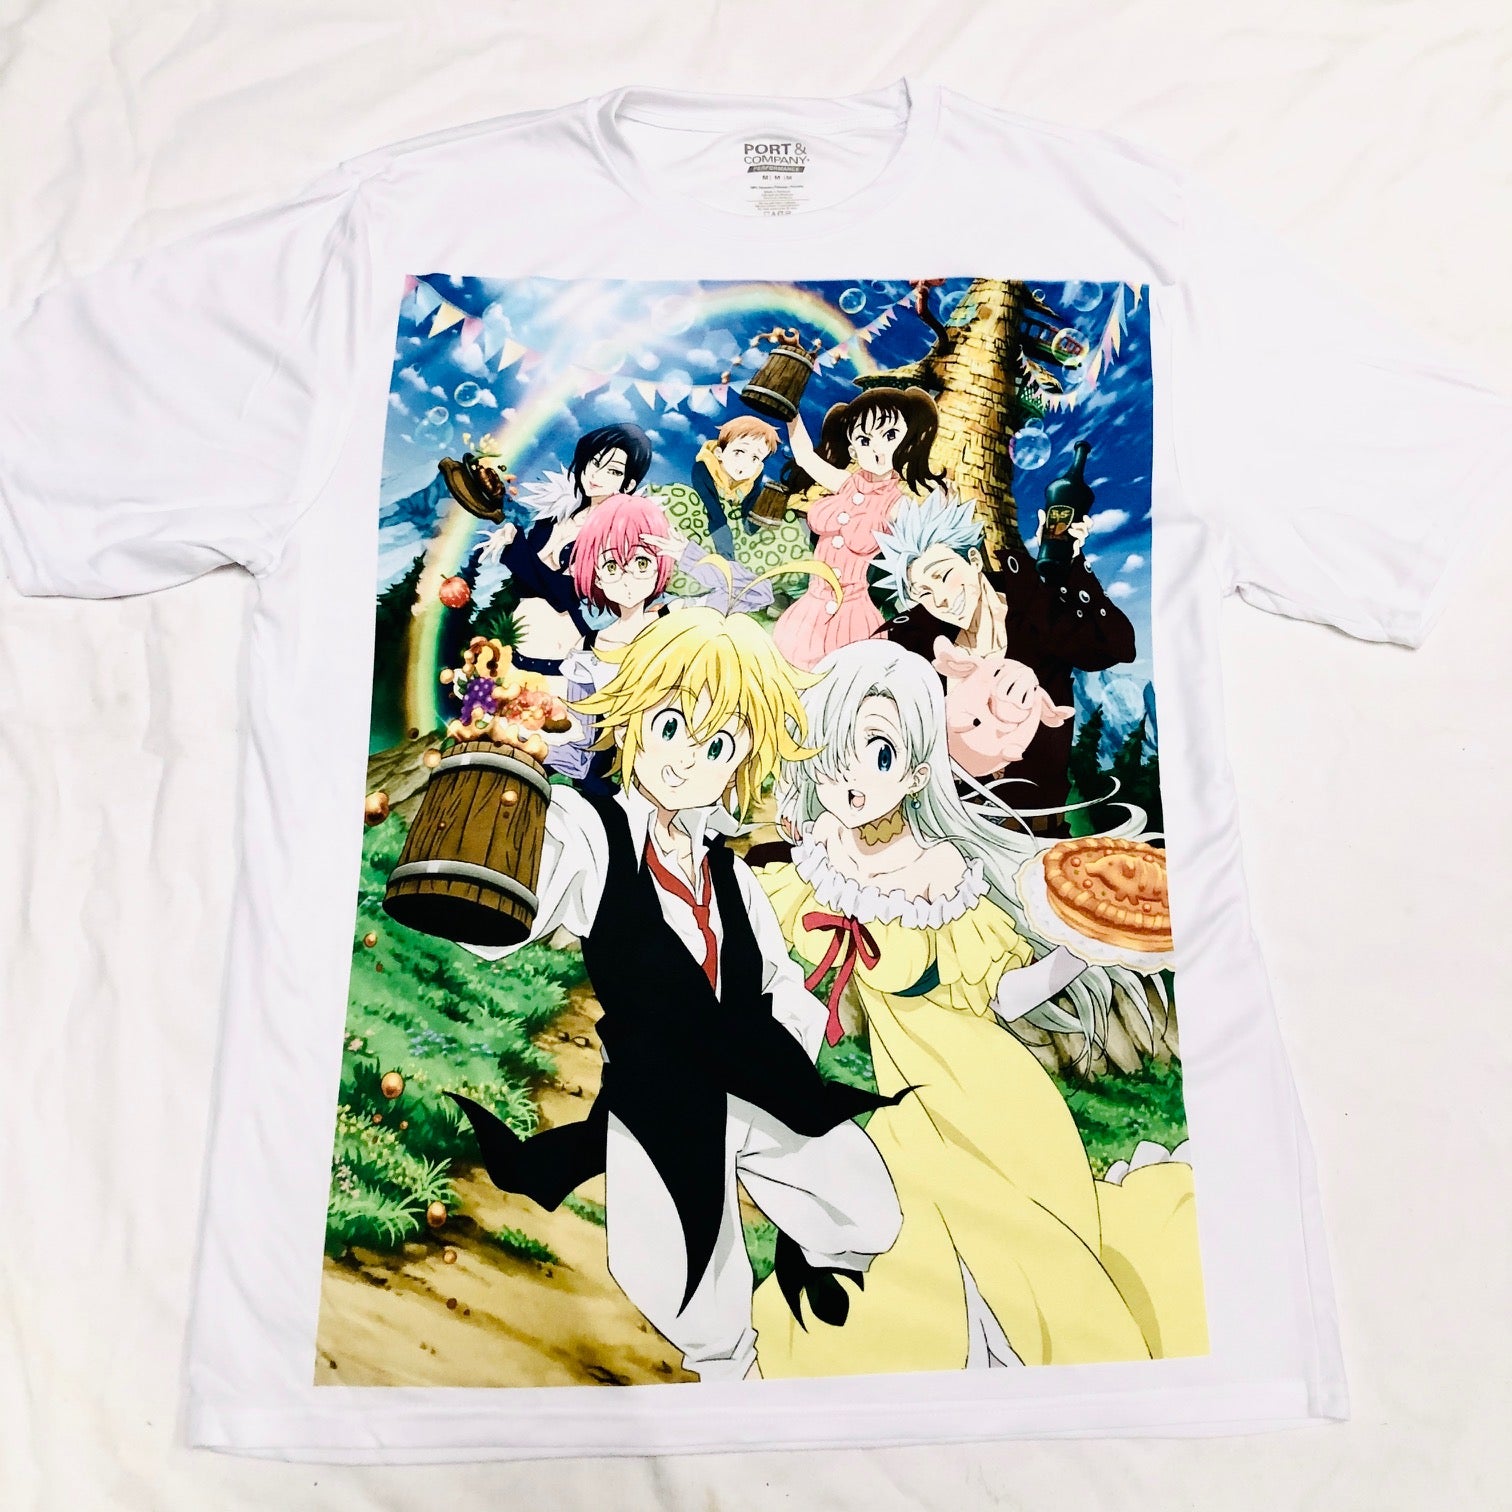 Anime Seven Deadly Sins T-Shirt - Super Anime Store FREE SHIPPING FAST SHIPPING USA